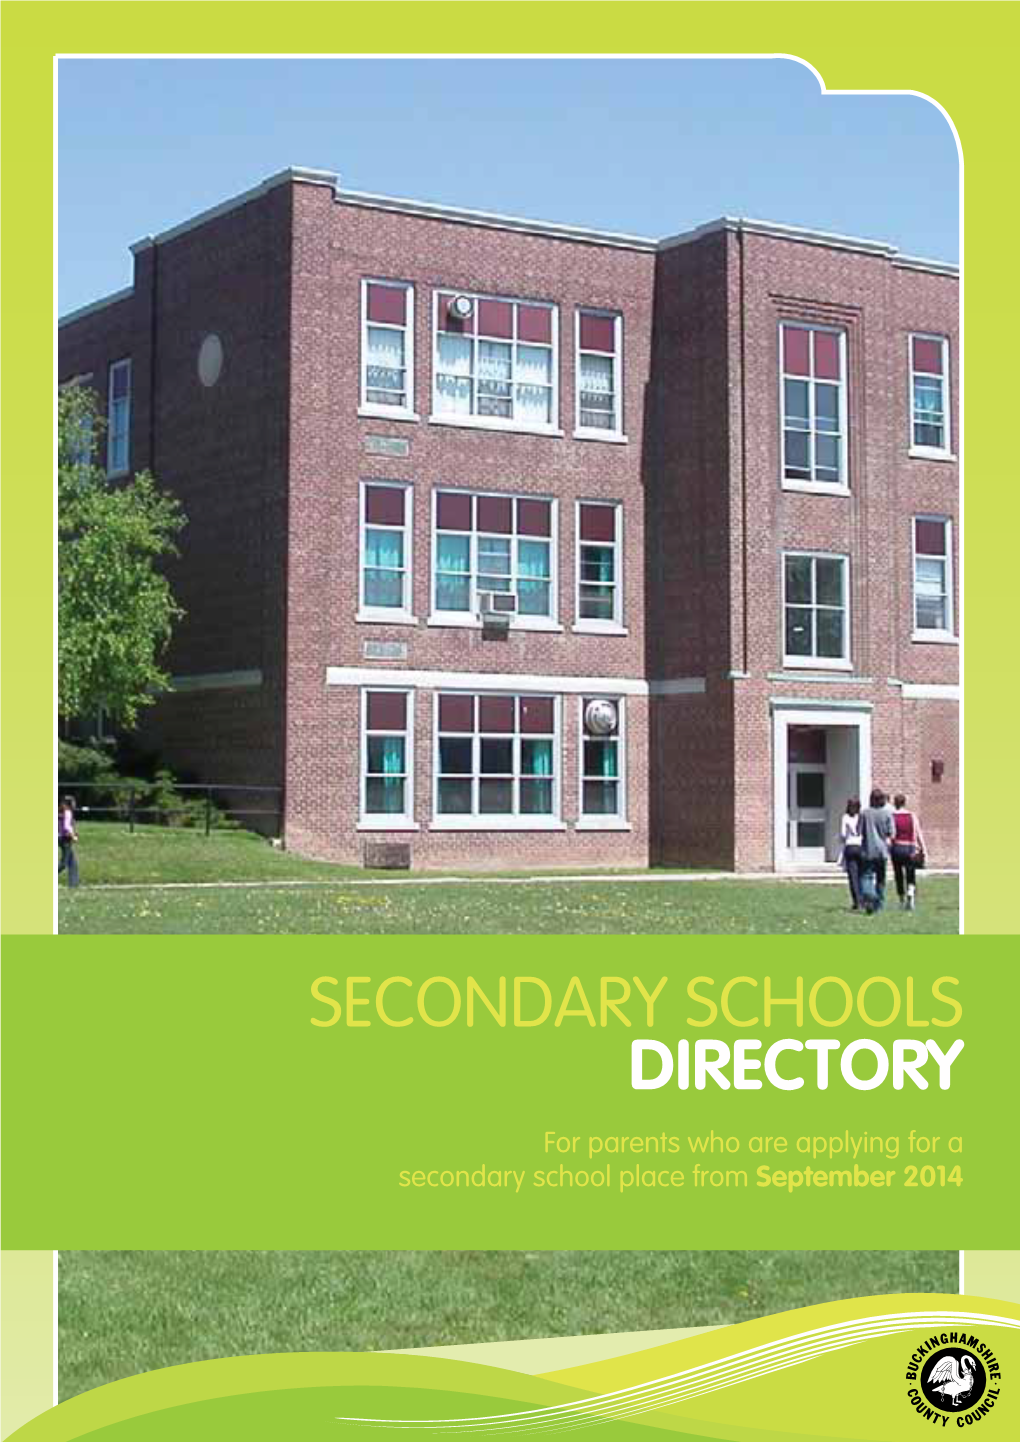 SECONDARY SCHOOLS DIRECTORY for Parents Who Are Applying for a Secondary School Place from September 2014